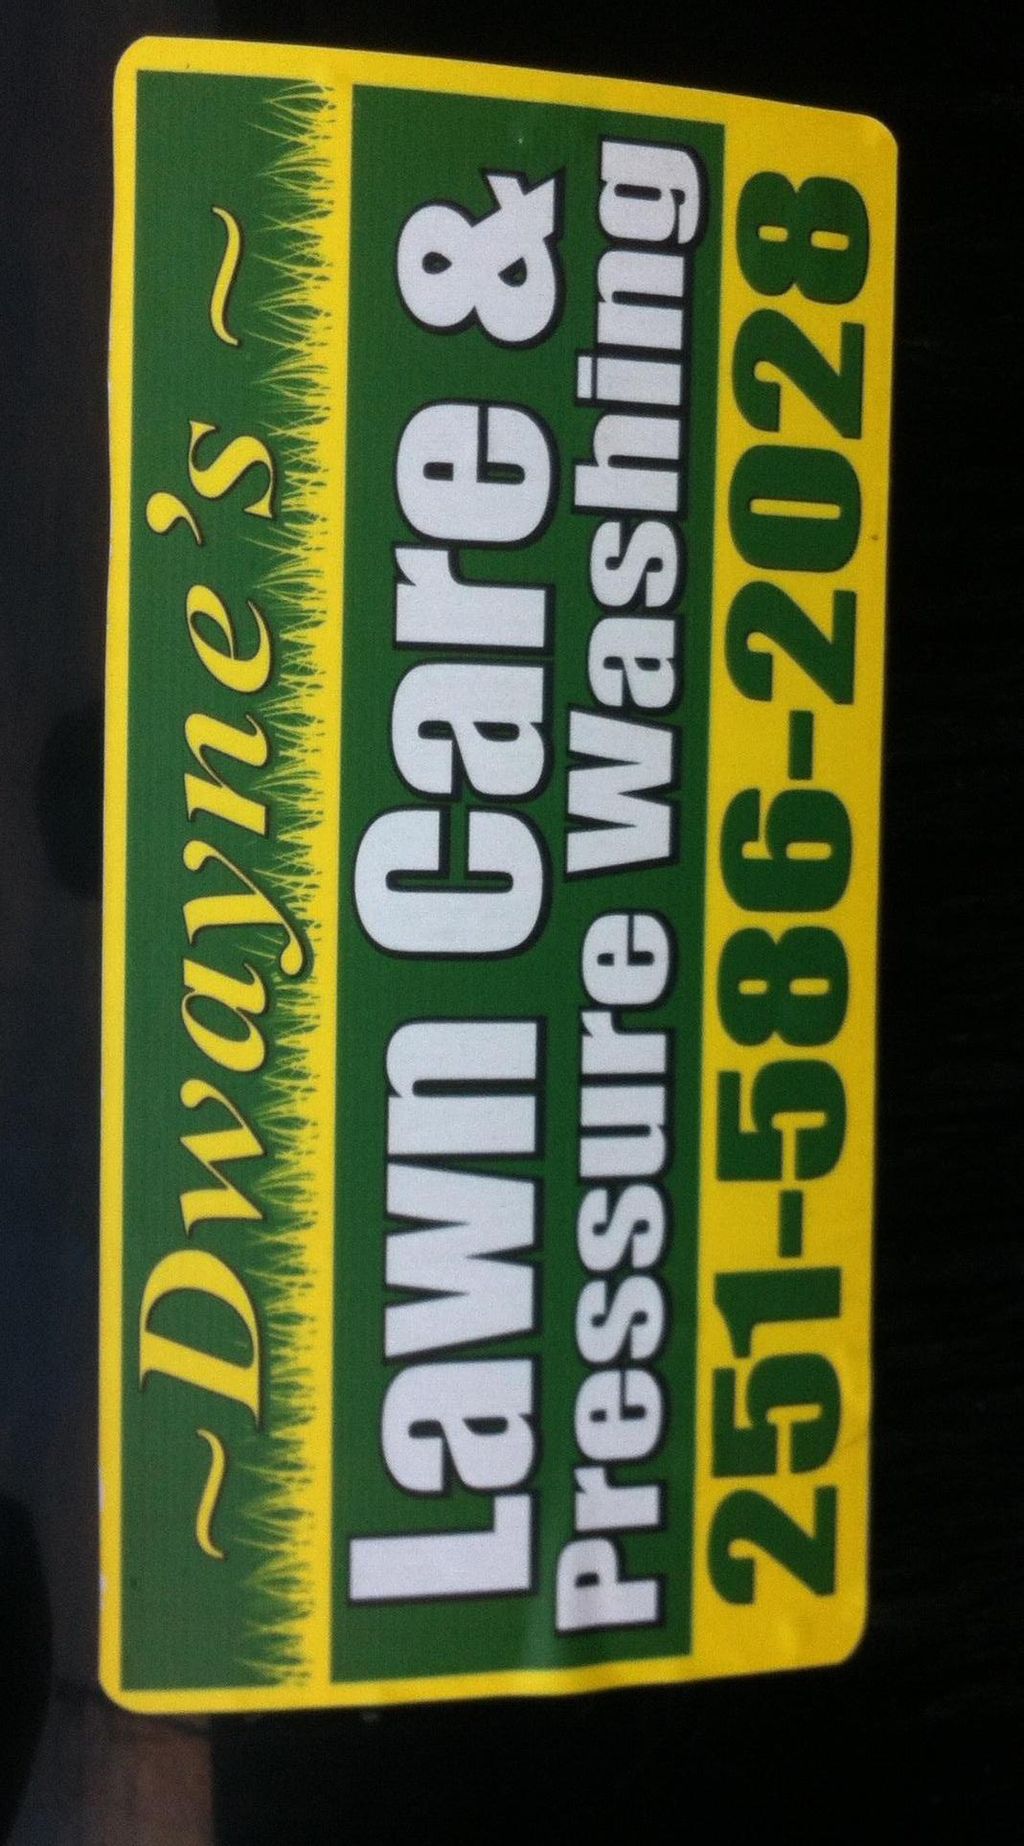 Dwayne's Lawncare and Pressure Washing